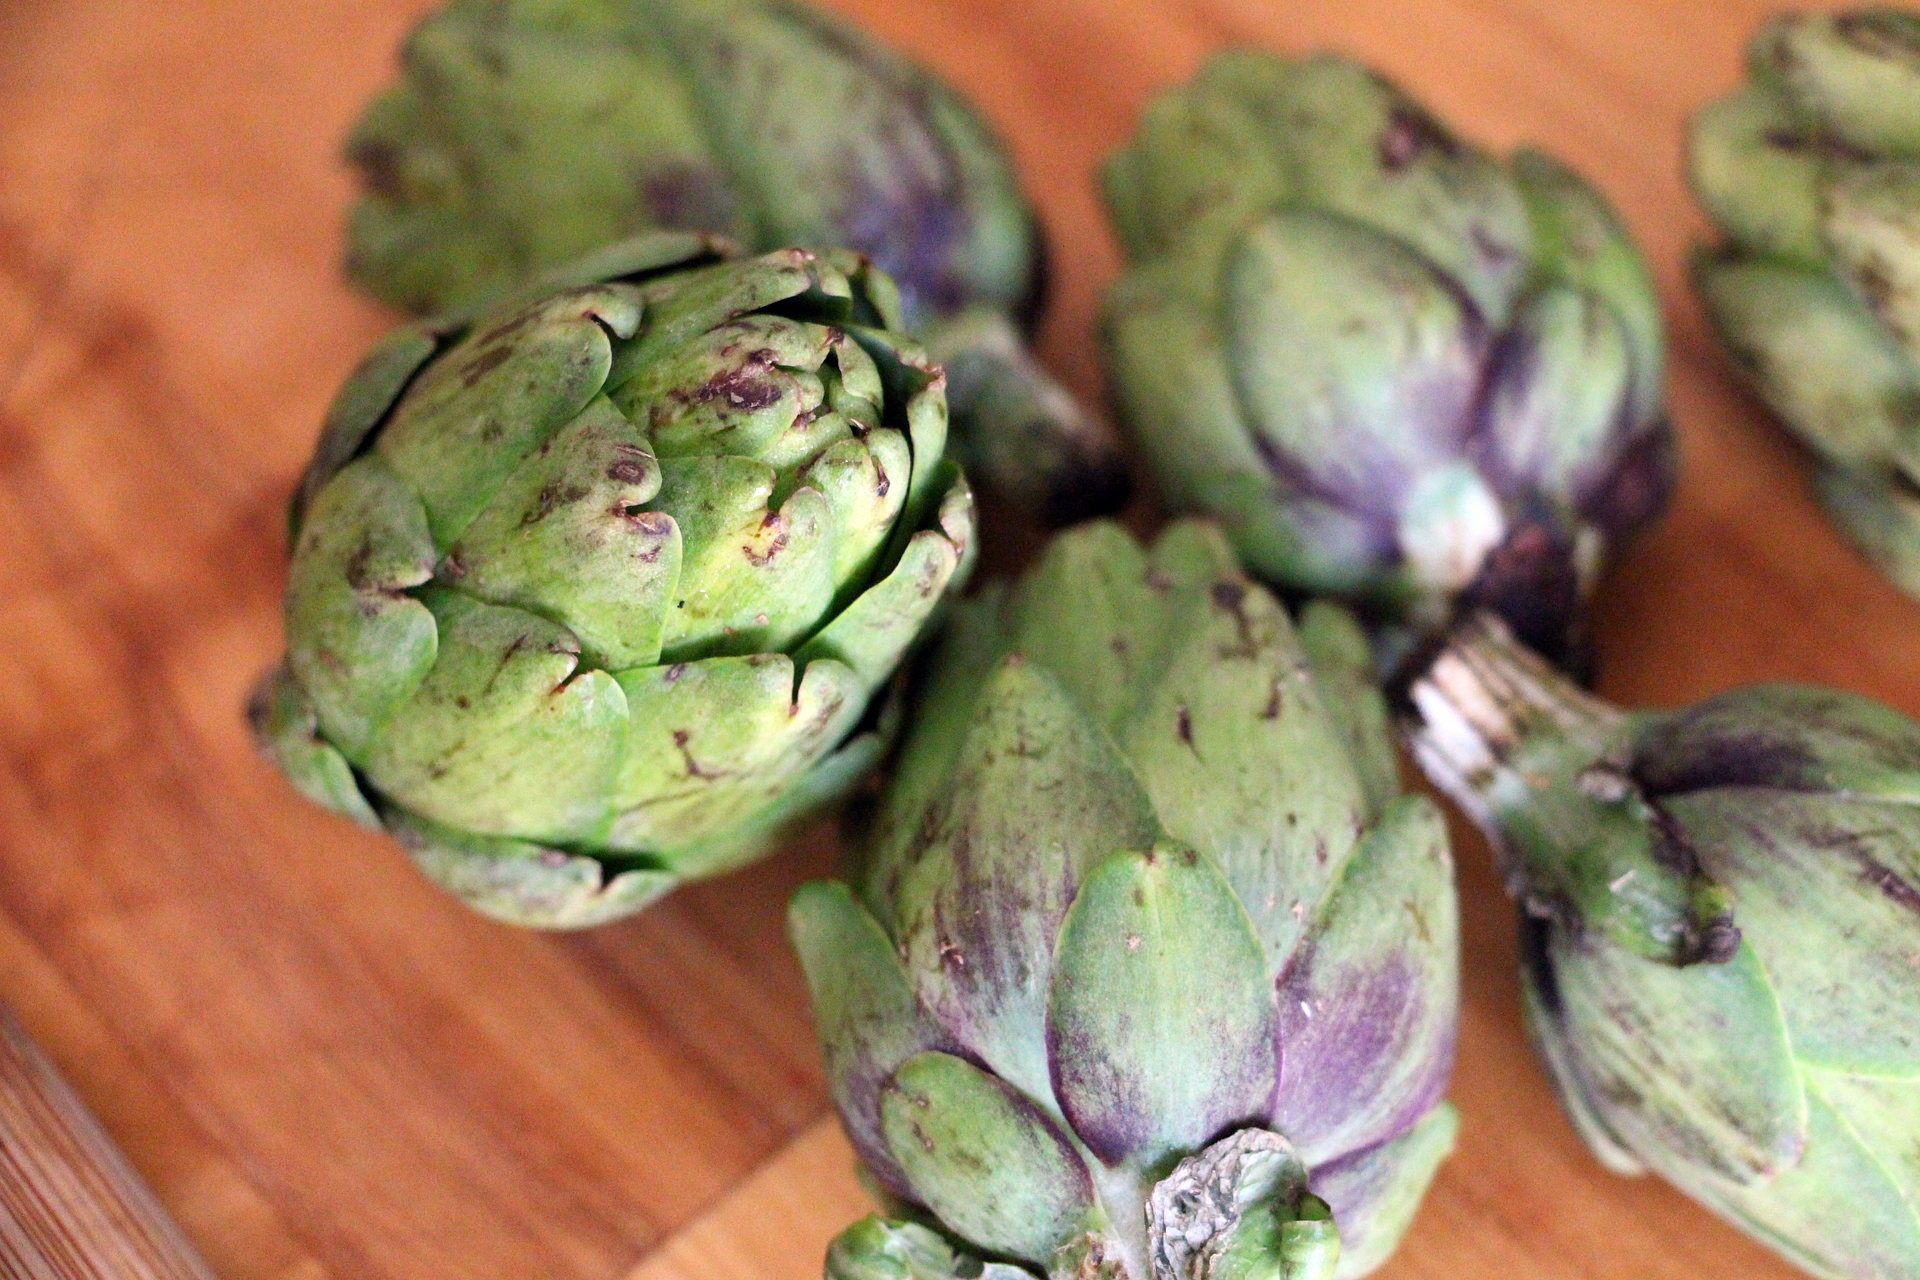 Start with whole baby artichokes.